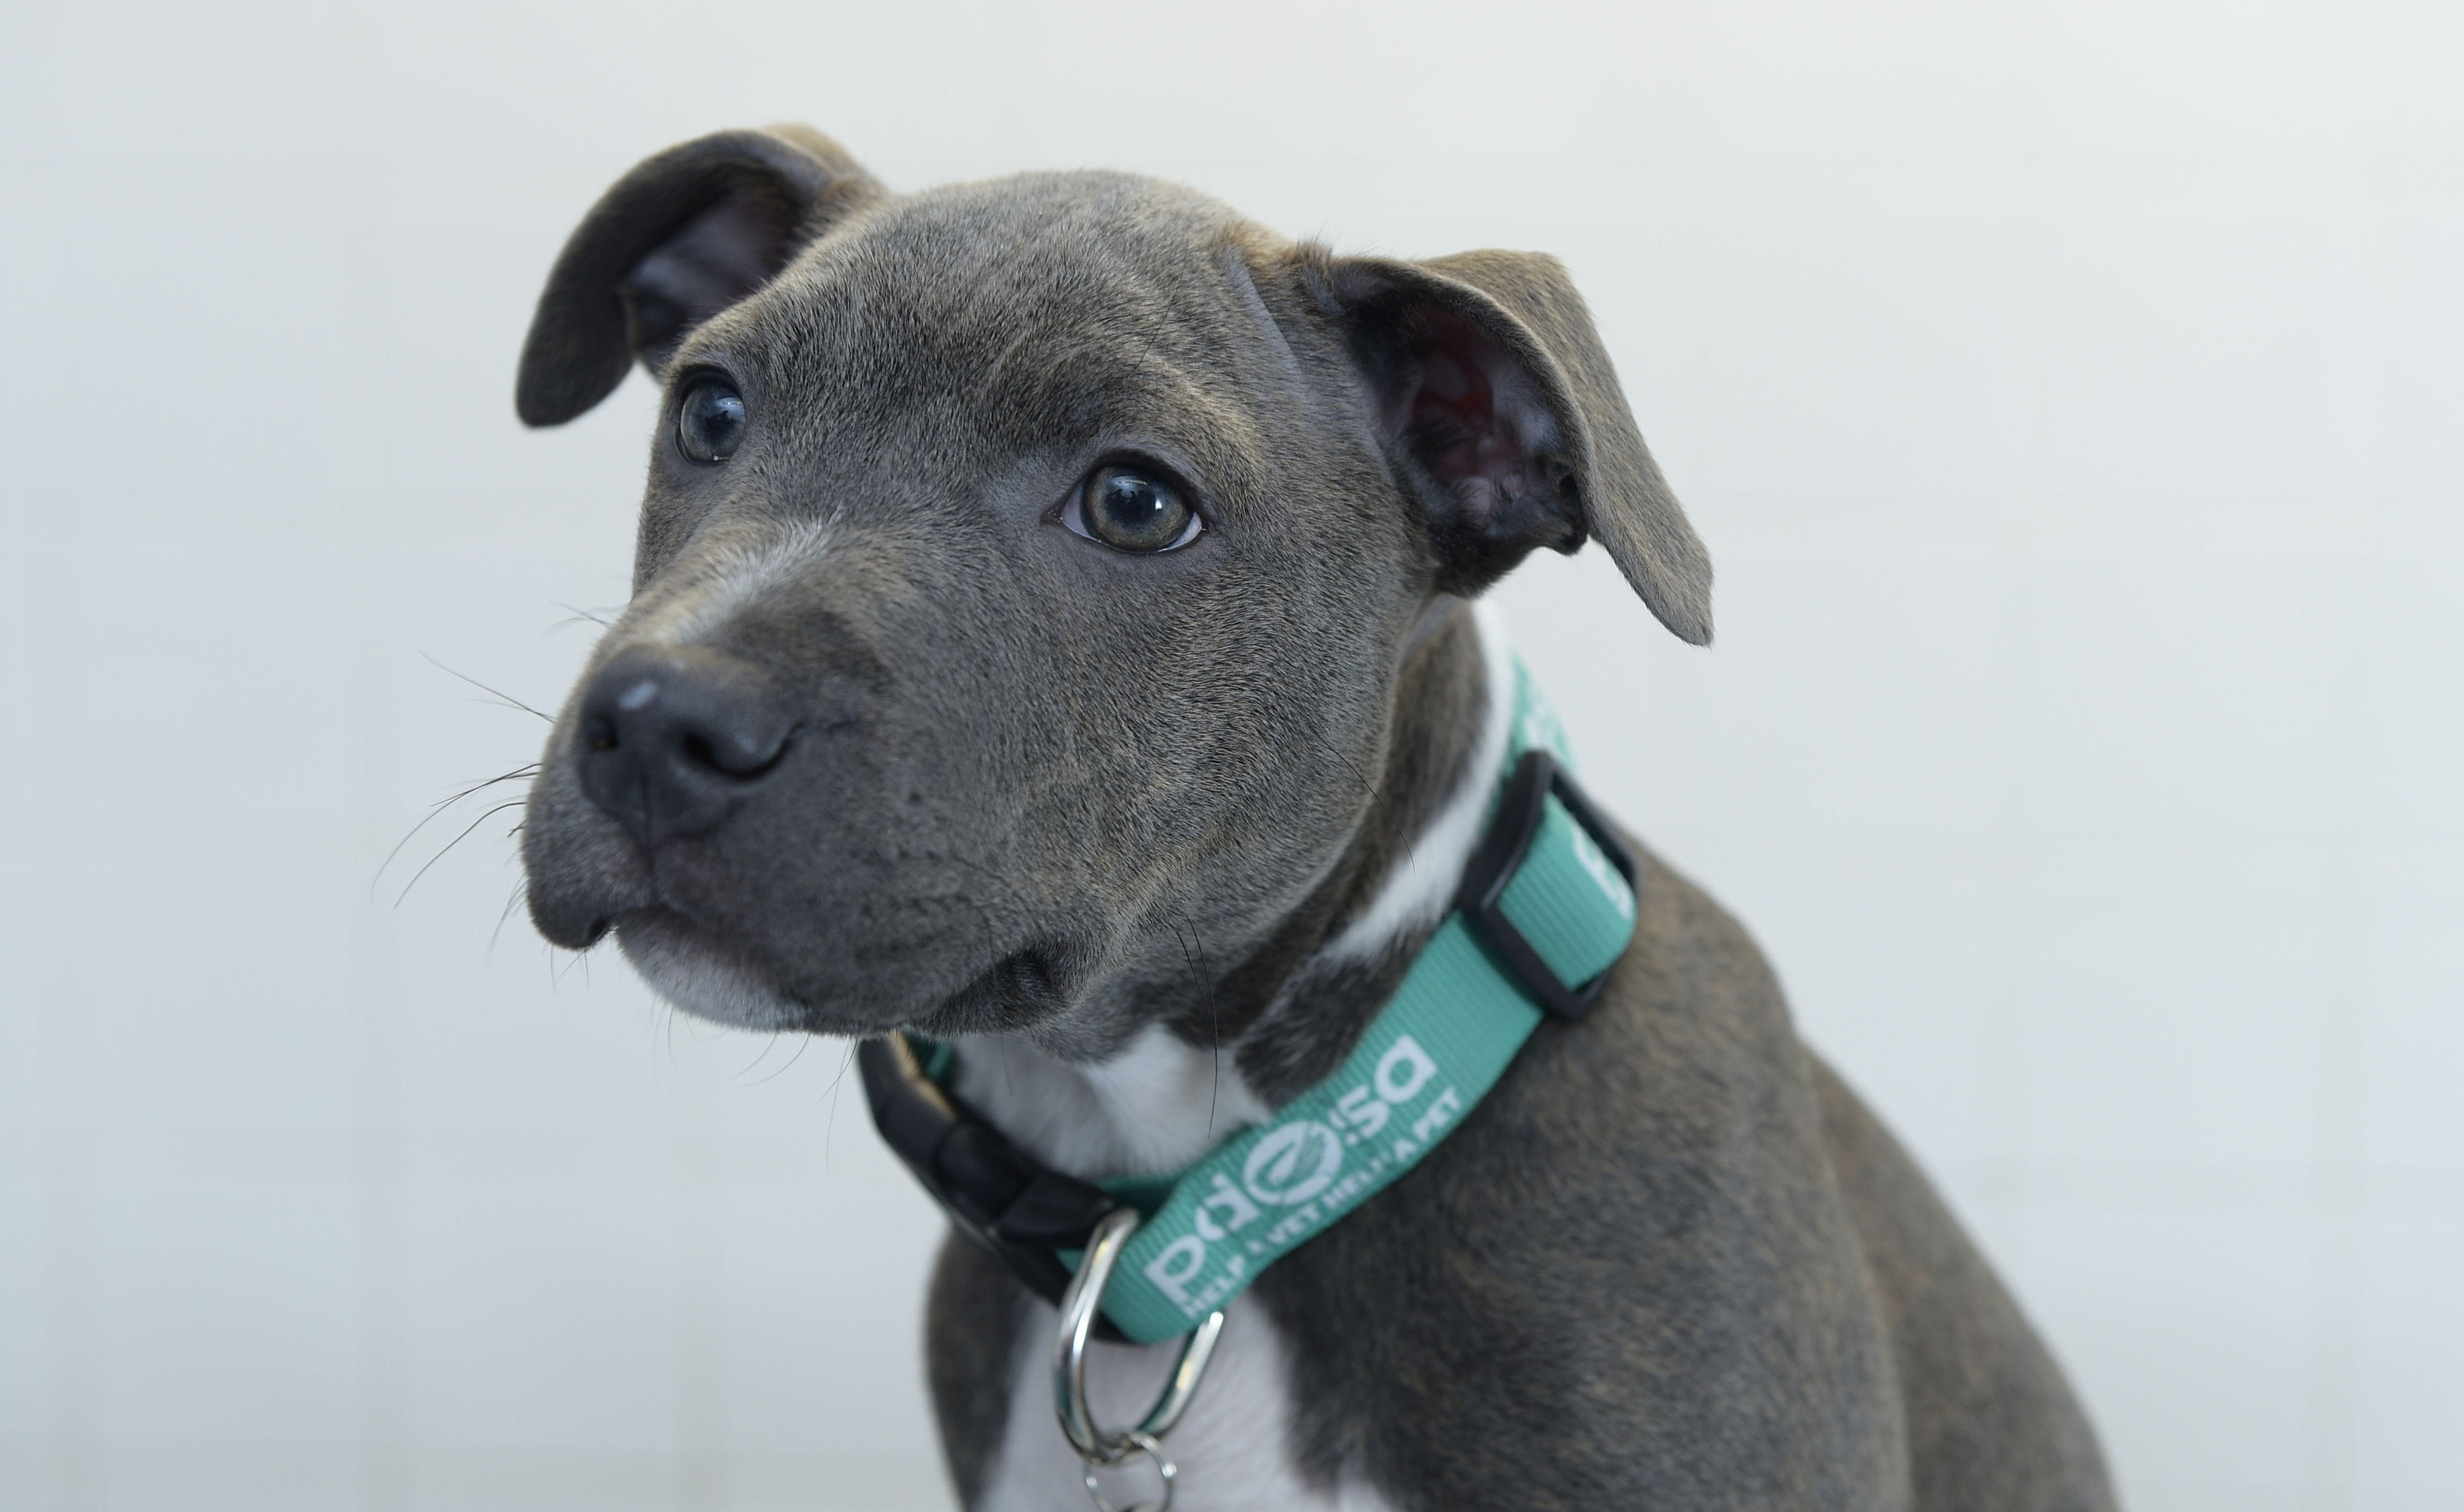 Our lead letter writer says Staffies "would rather smother you with love than attack anyone".